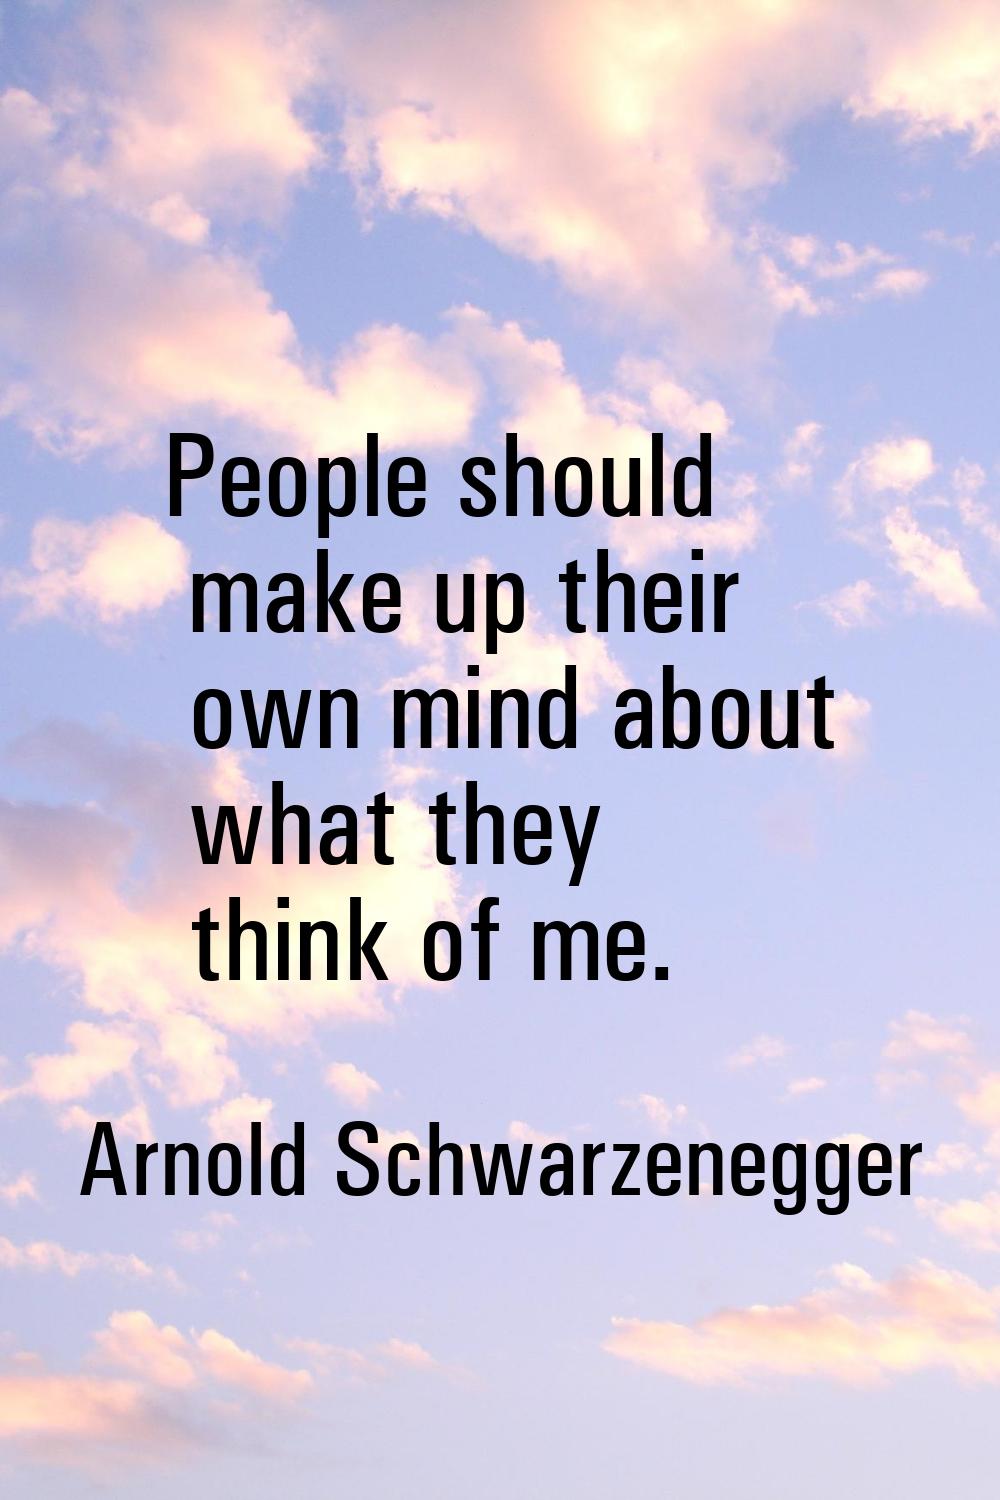 People should make up their own mind about what they think of me.